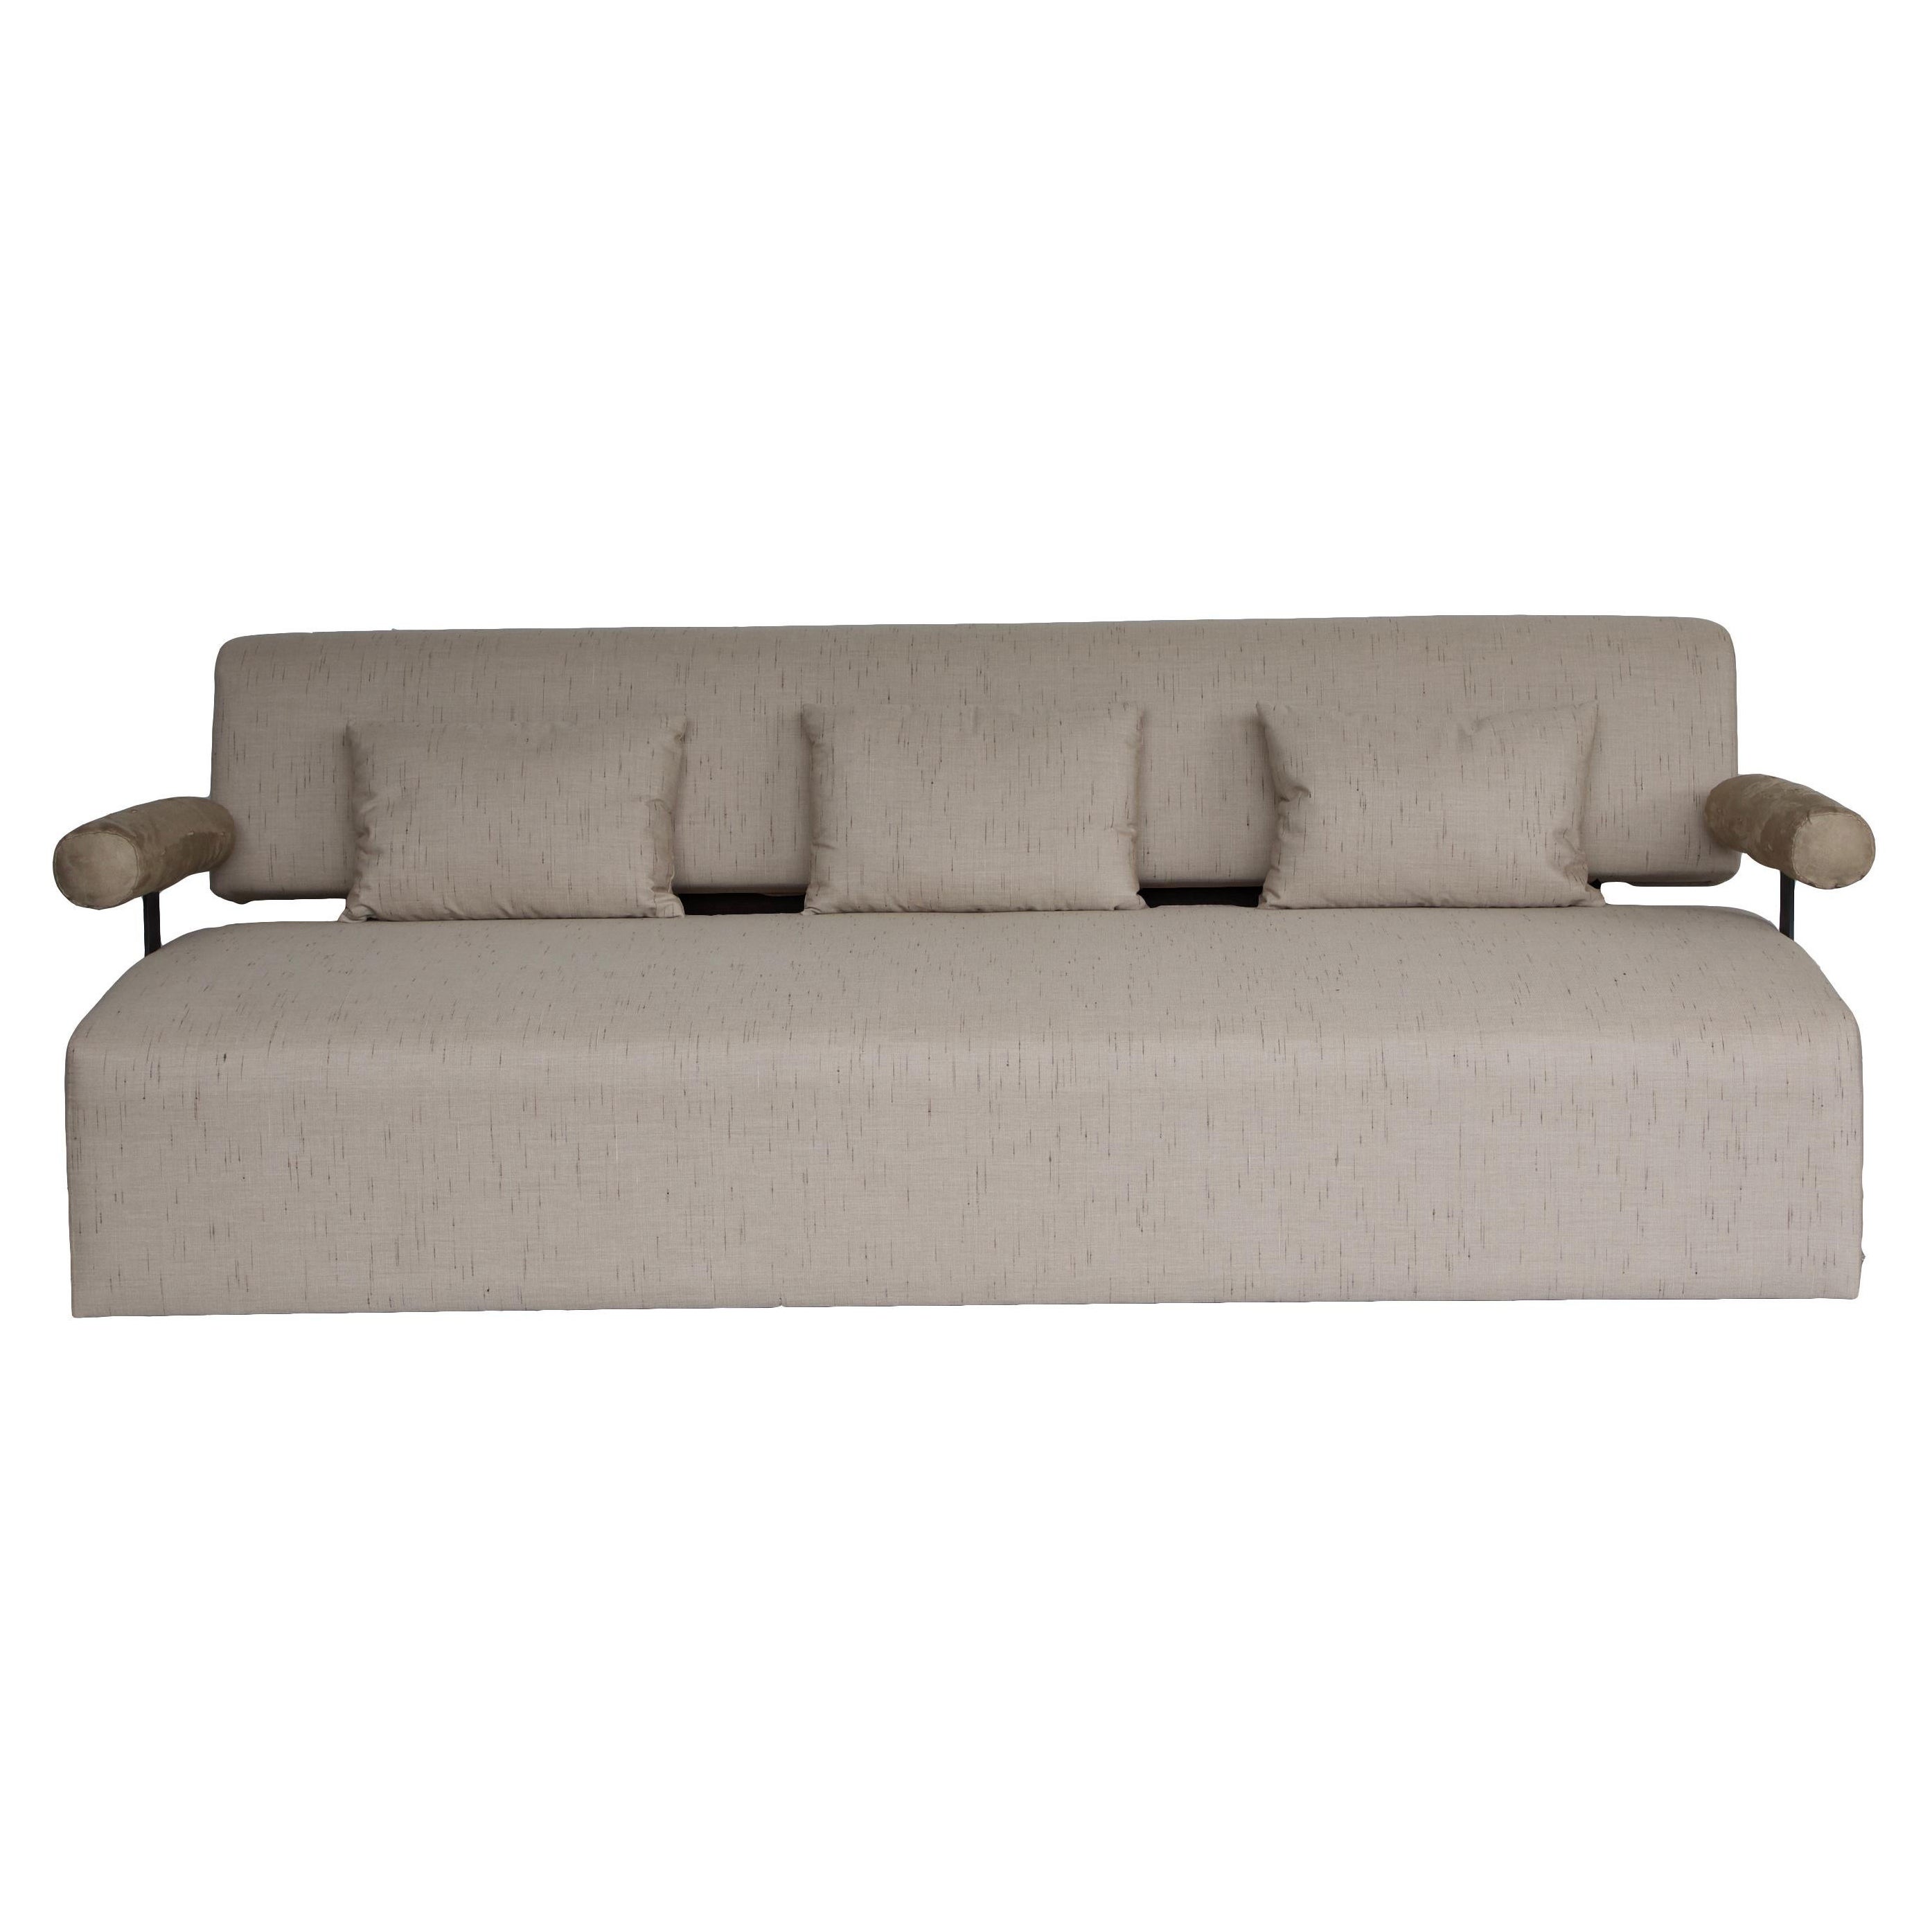 Raw Steel and Upholstered Oak, Contemporary, Sculptural, Pisa Sofa For Sale